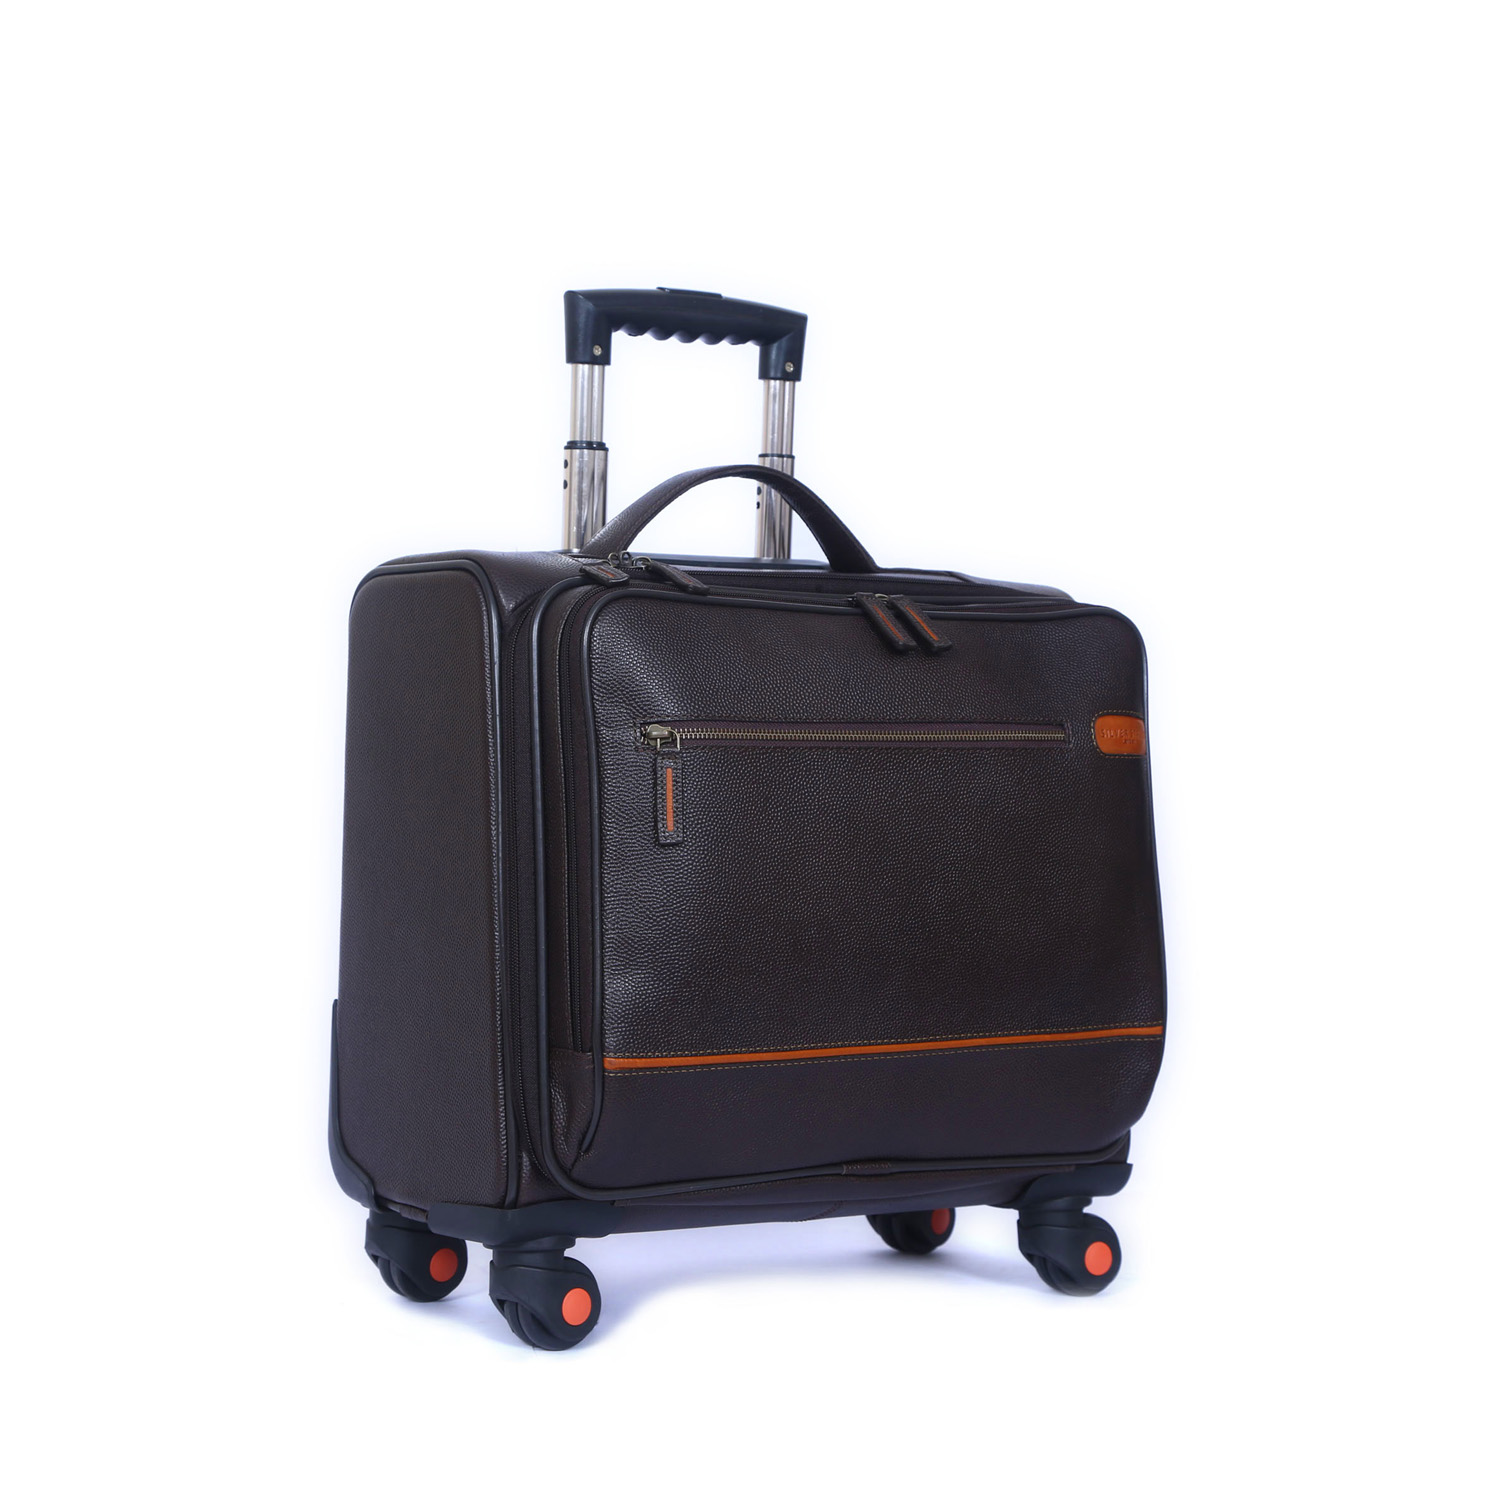 Business & Travel Goods Accessories